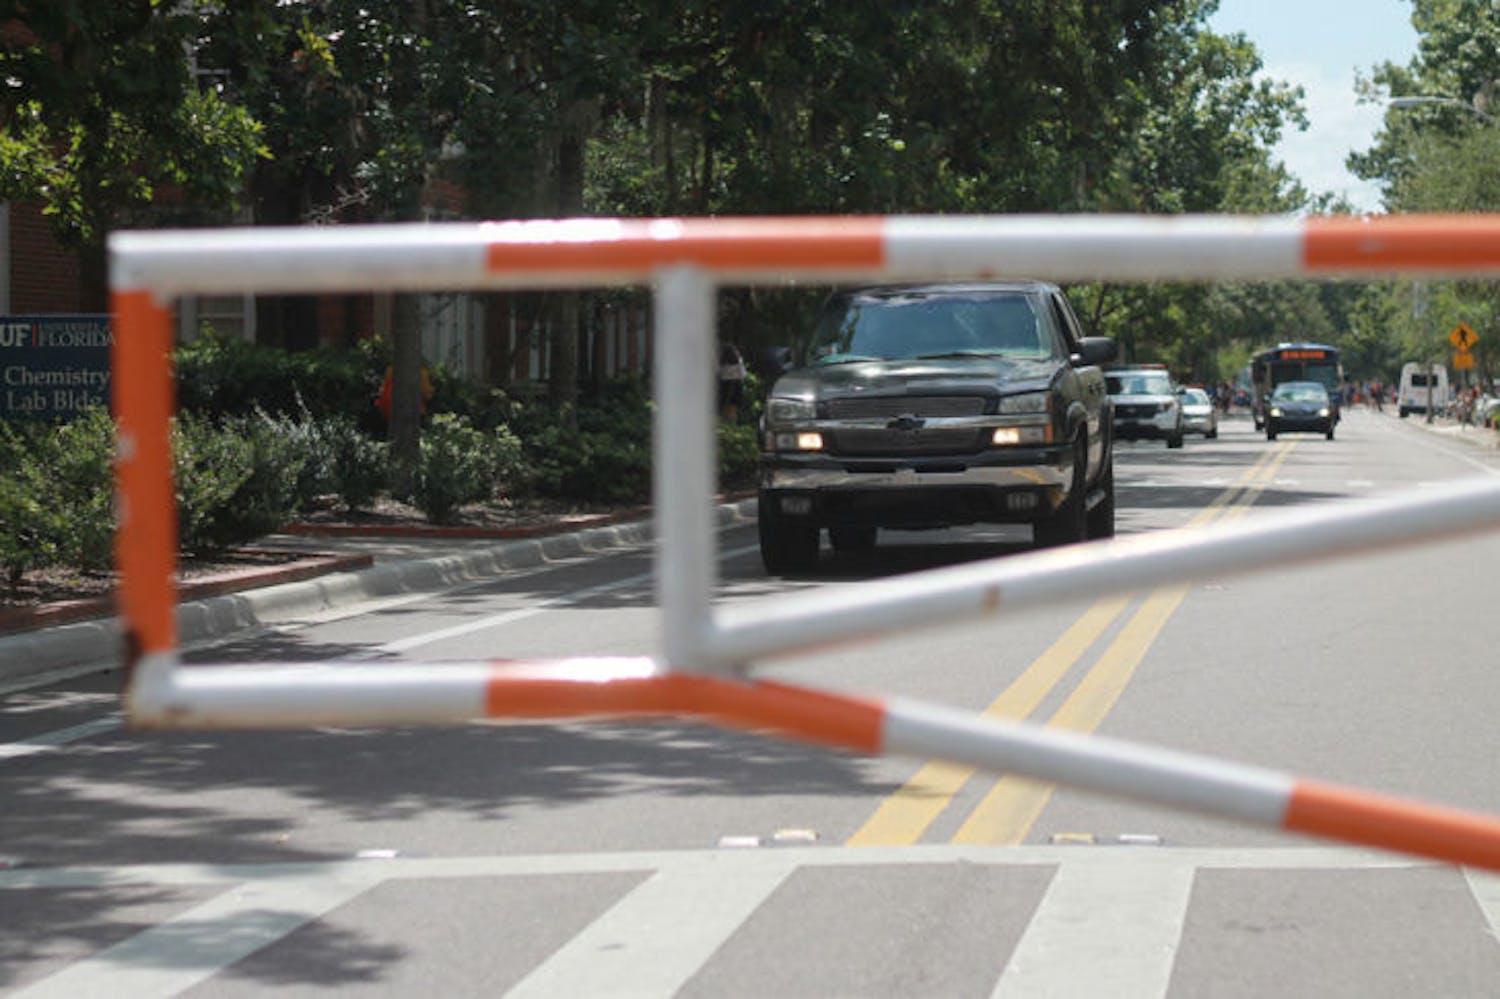 A driver attempts to drive around the barrier blocking Buckman Drive on Sept. 19. University Police frequently pulls over drivers crossing these barriers.